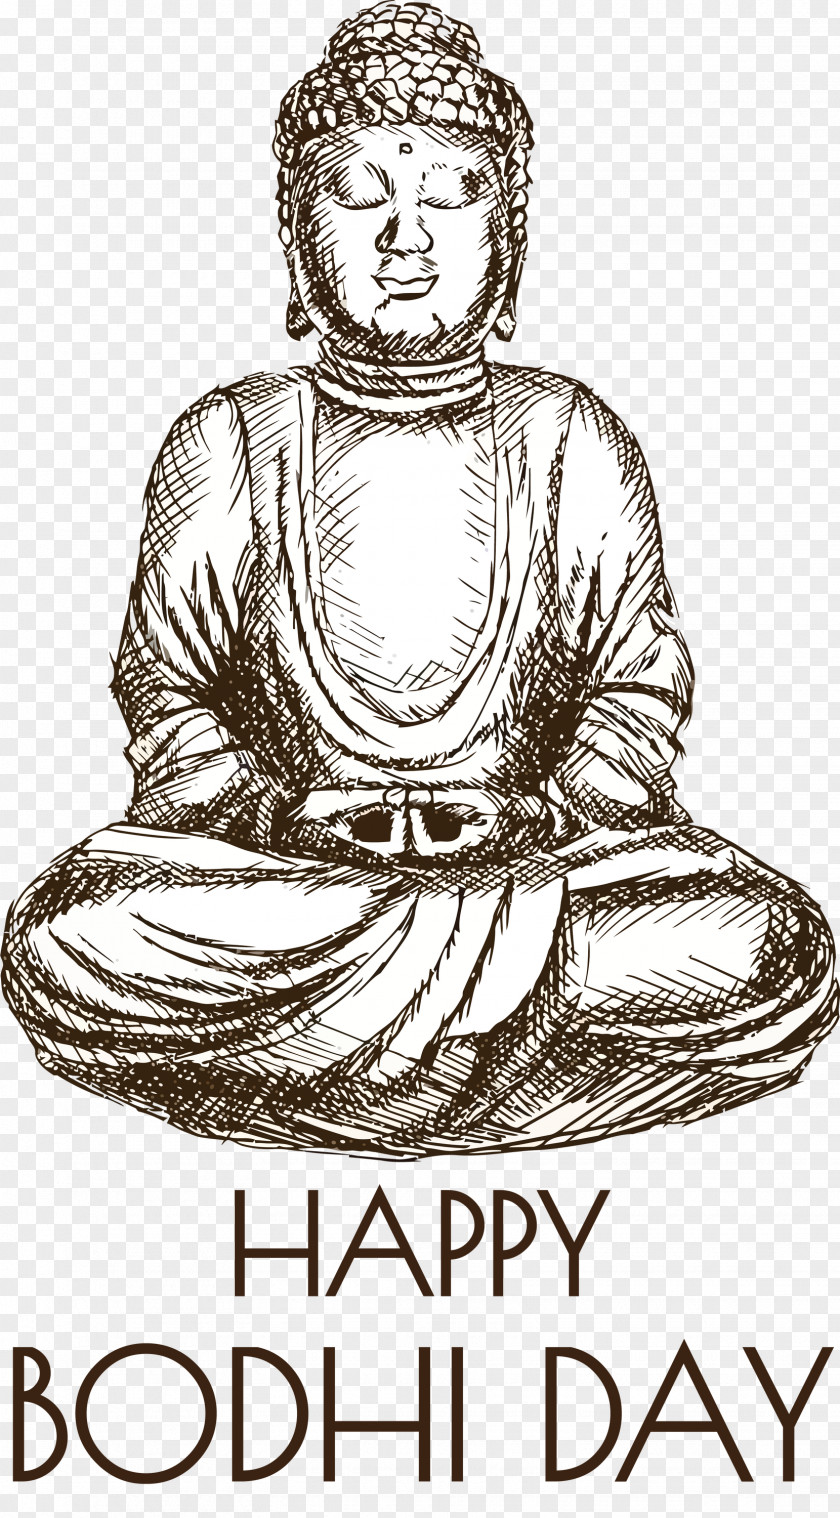 Bodhi Day Buddhist Holiday Bodhi PNG